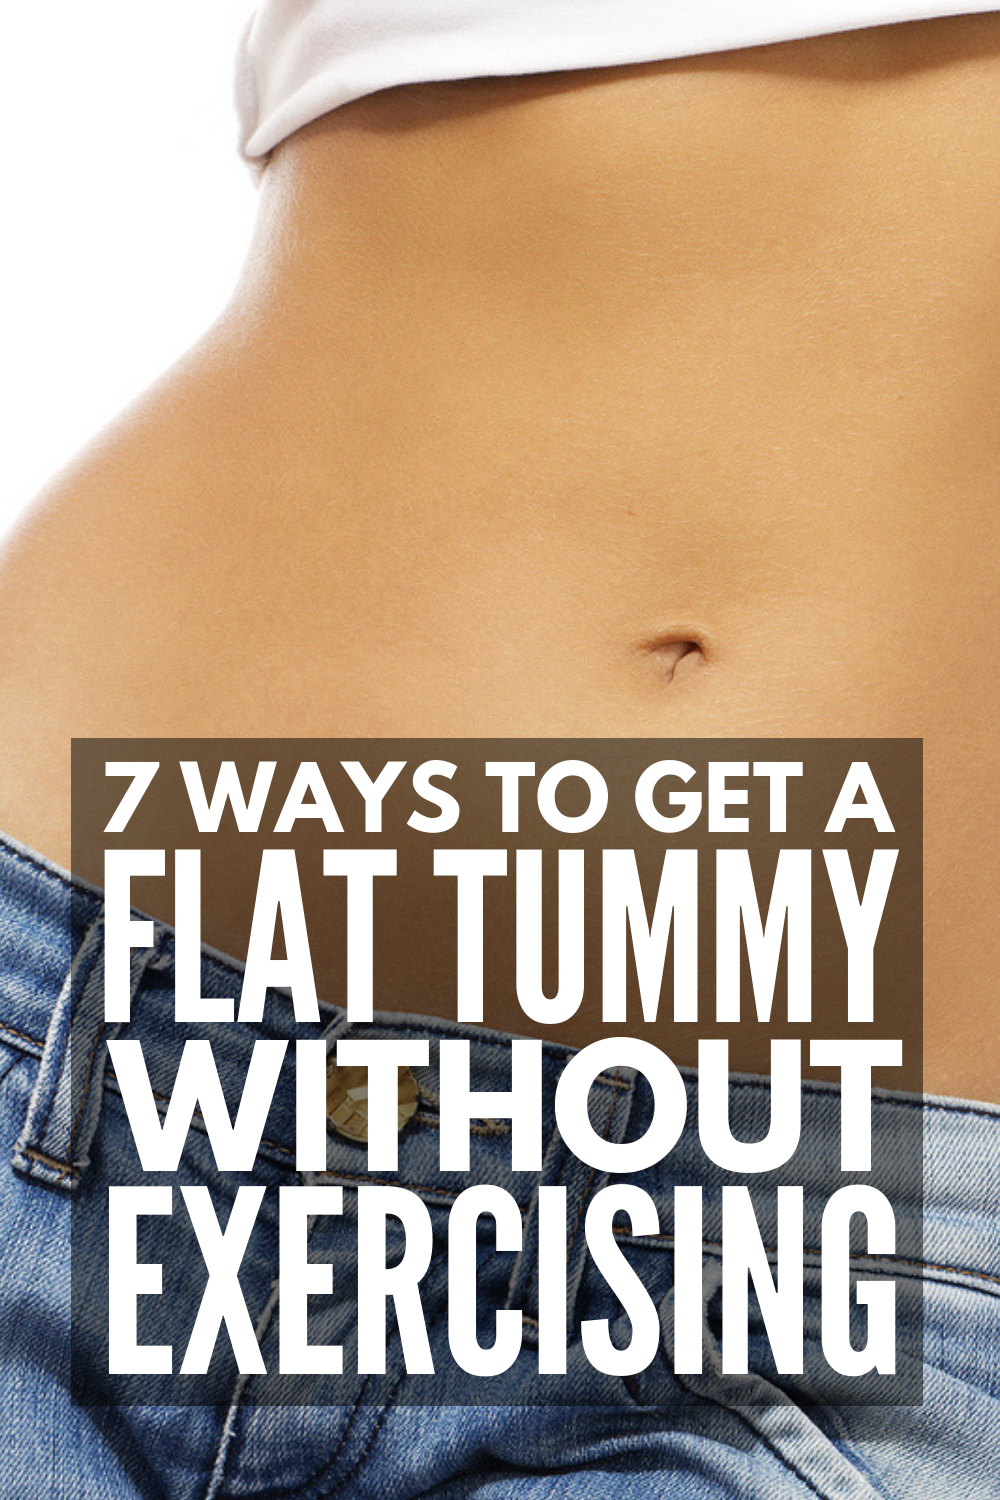 11 Best Flat Stomach Exercises to Lose Belly Fat in a Week at Home -  Taphanrenno - Medium